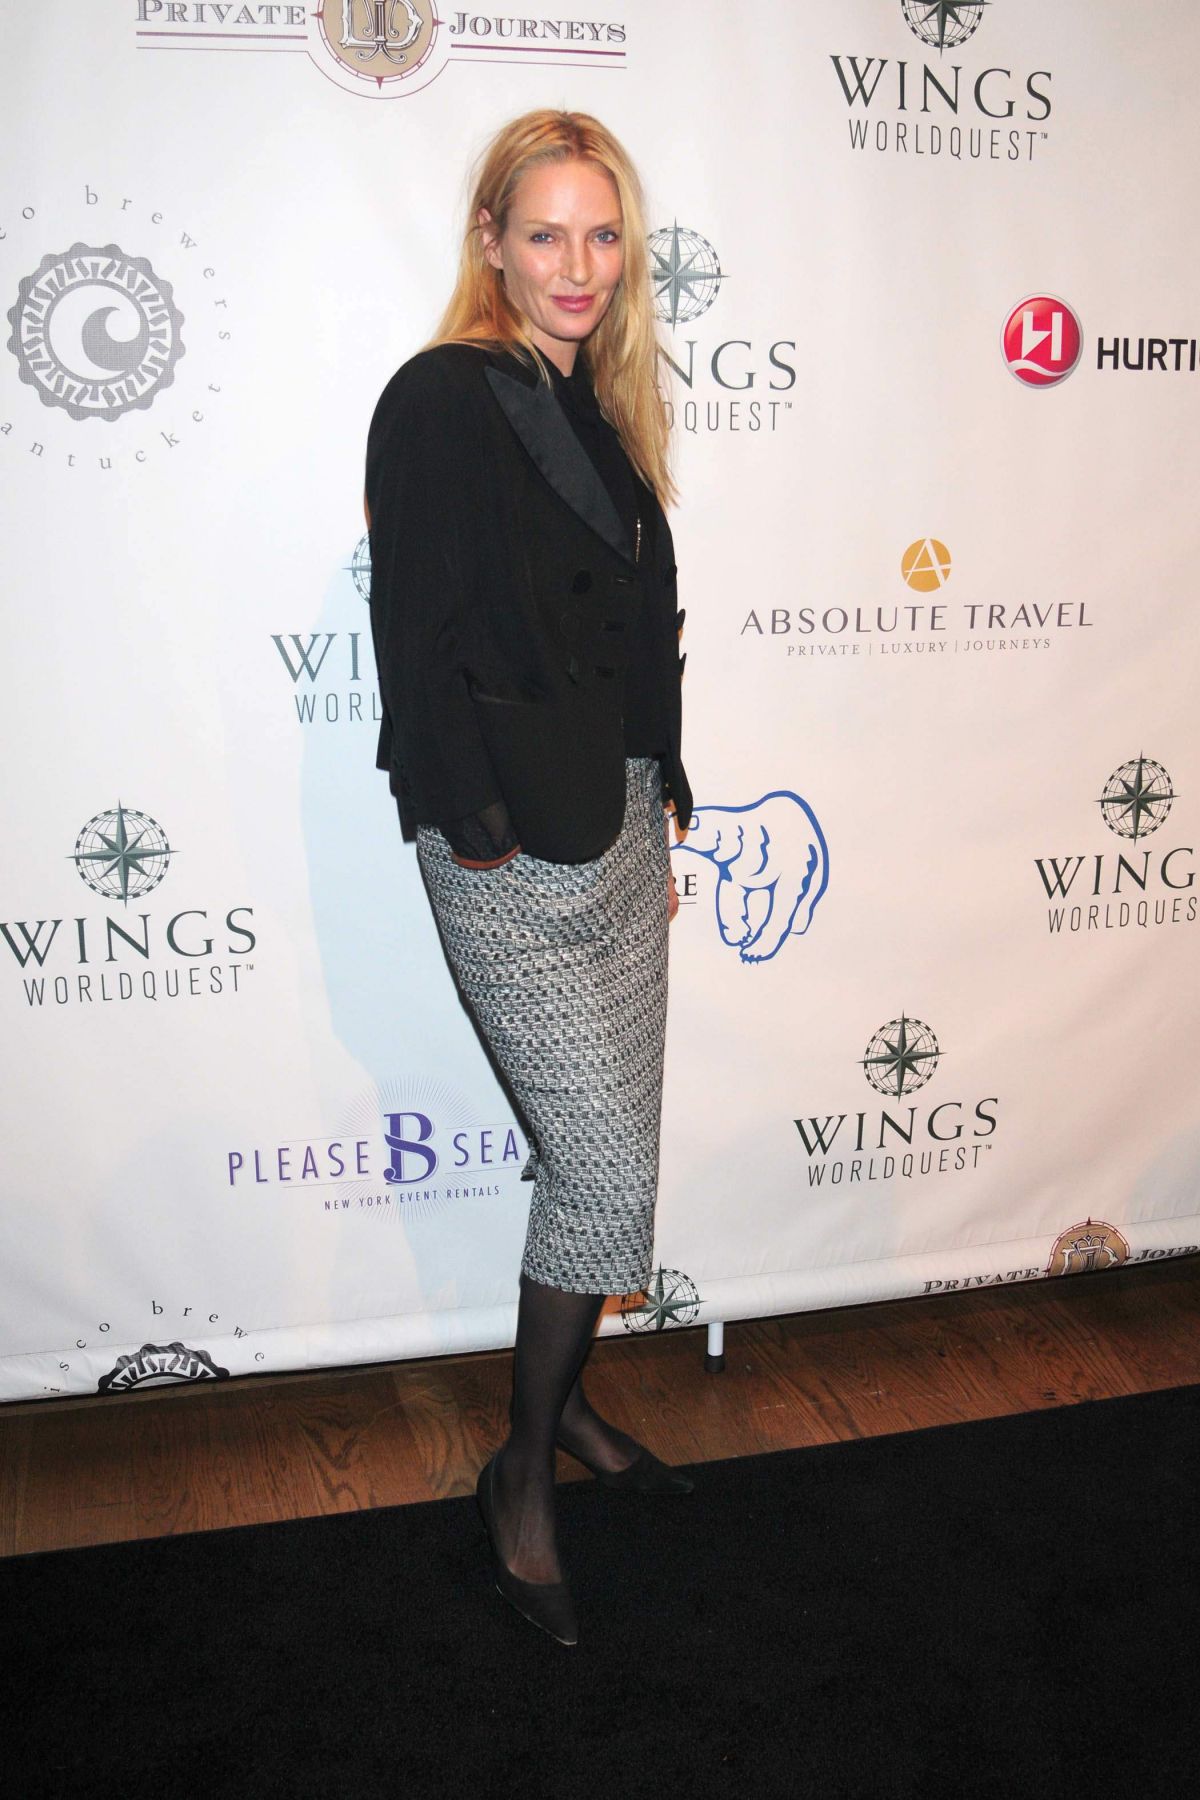 UMA THURMAN at 2014 Wings Worldquest Women of Discovery Awards – HawtCelebs